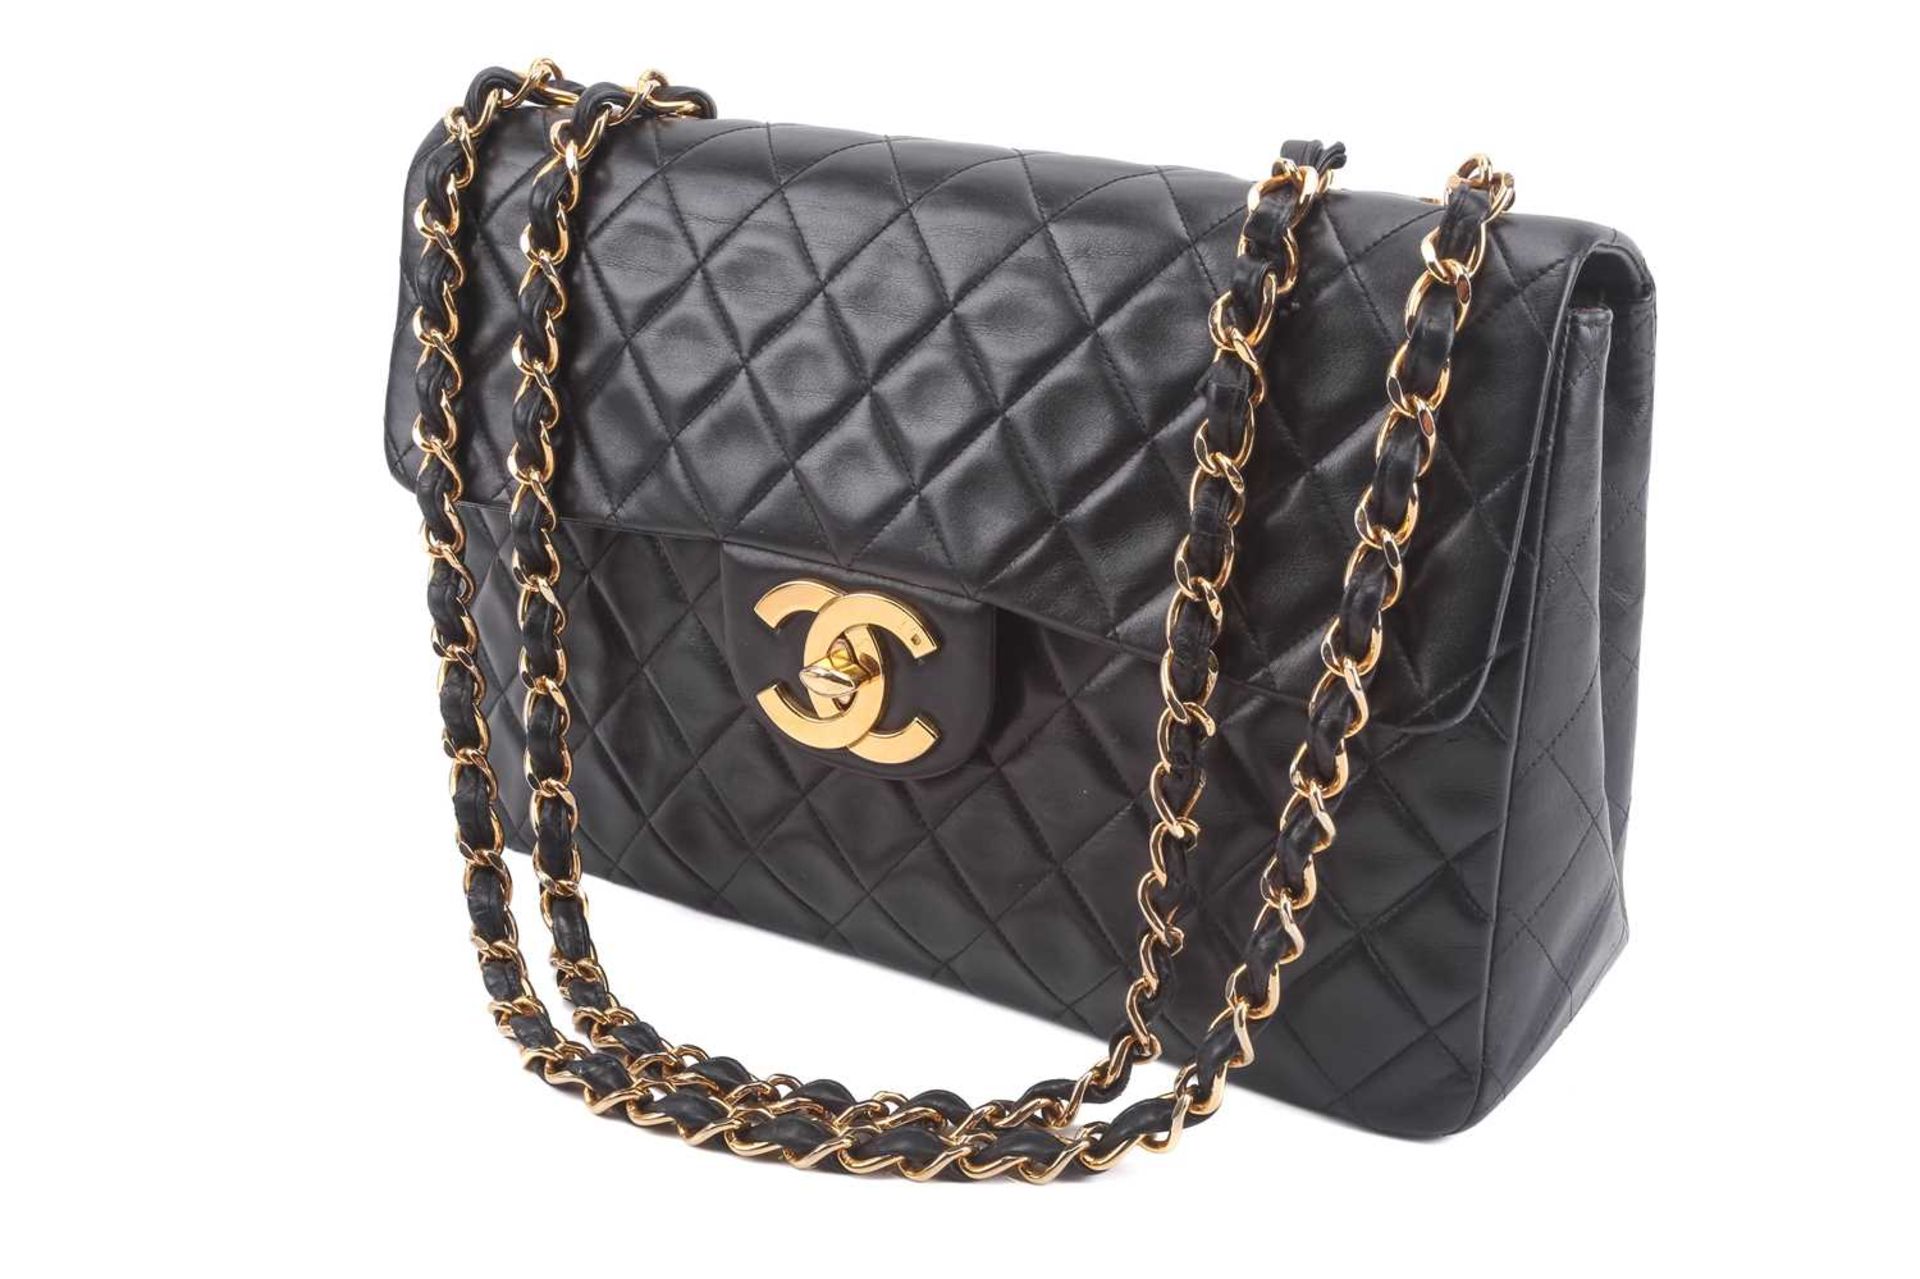 Chanel - a jumbo XL single flap bag in black diamond-quilted lambskin leather, circa 1991, - Image 3 of 15